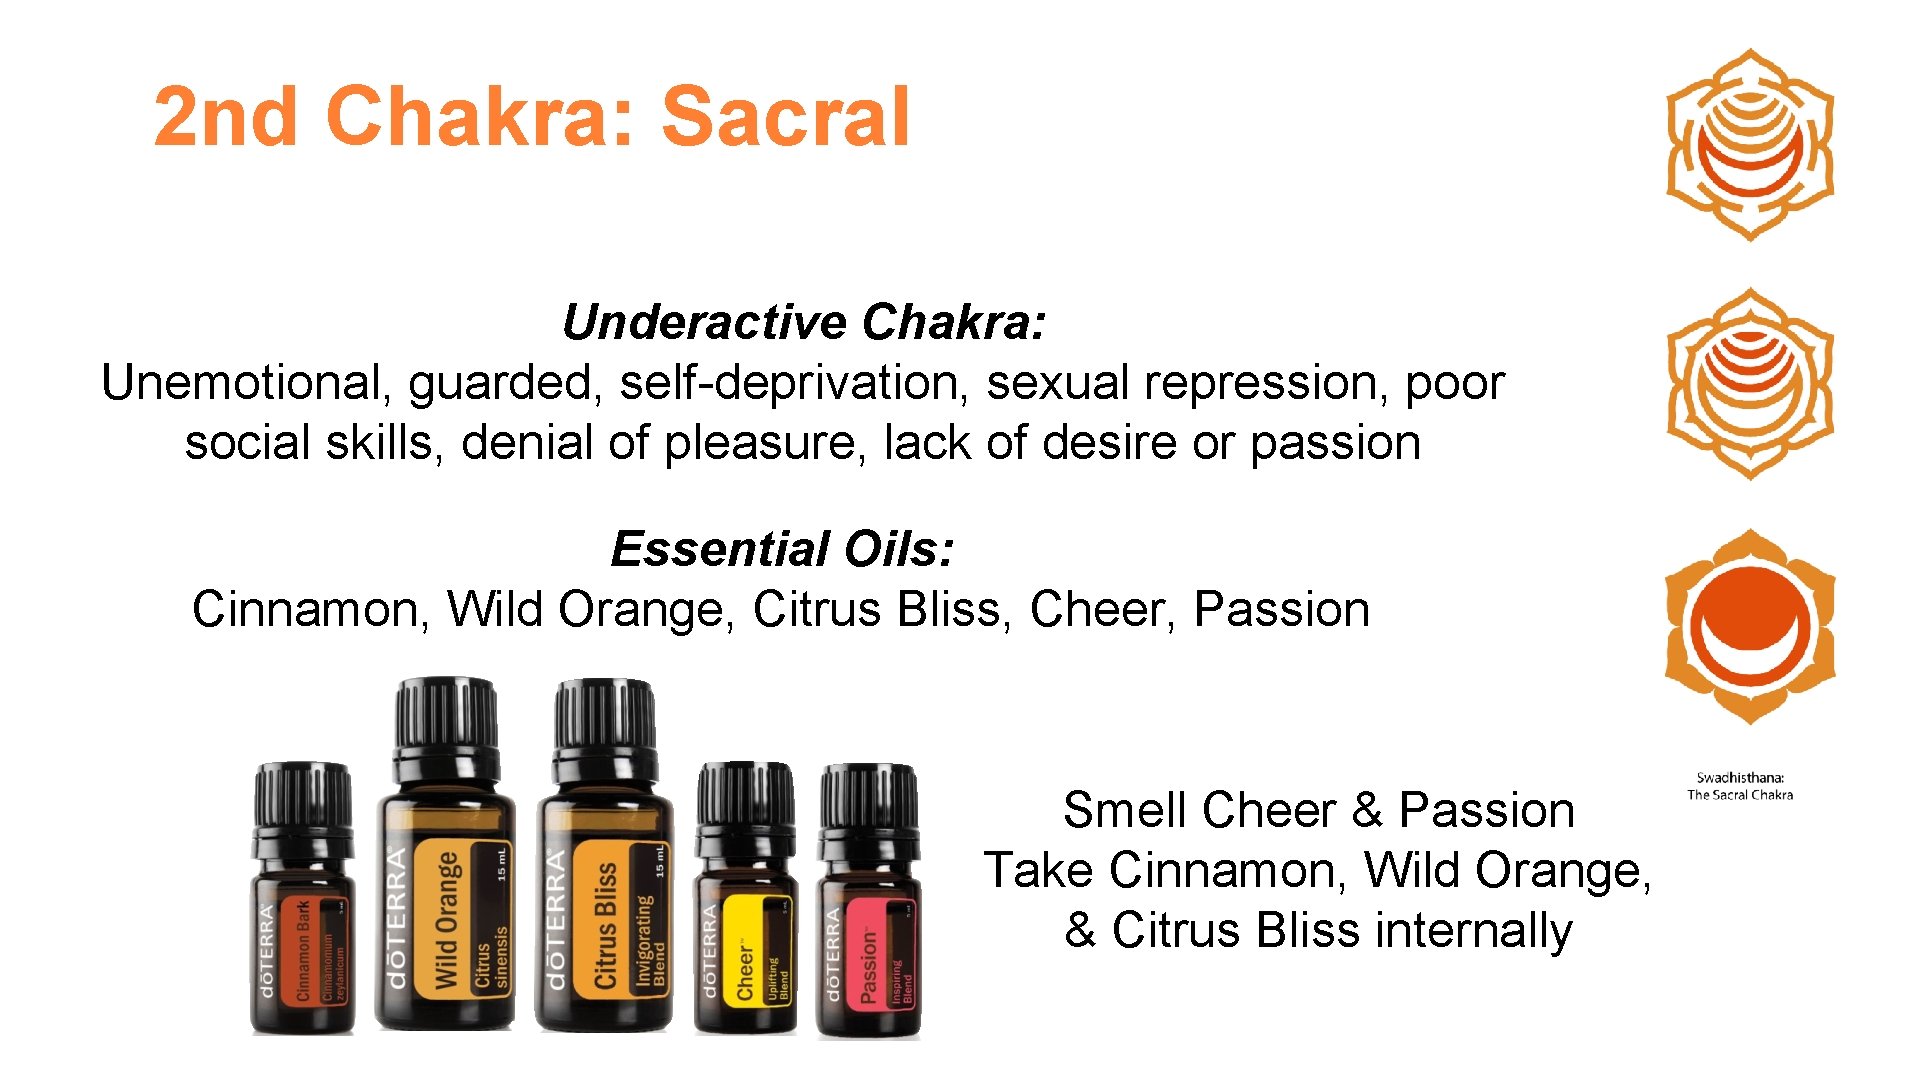 2 nd Chakra: Sacral Underactive Chakra: Unemotional, guarded, self-deprivation, sexual repression, poor social skills,